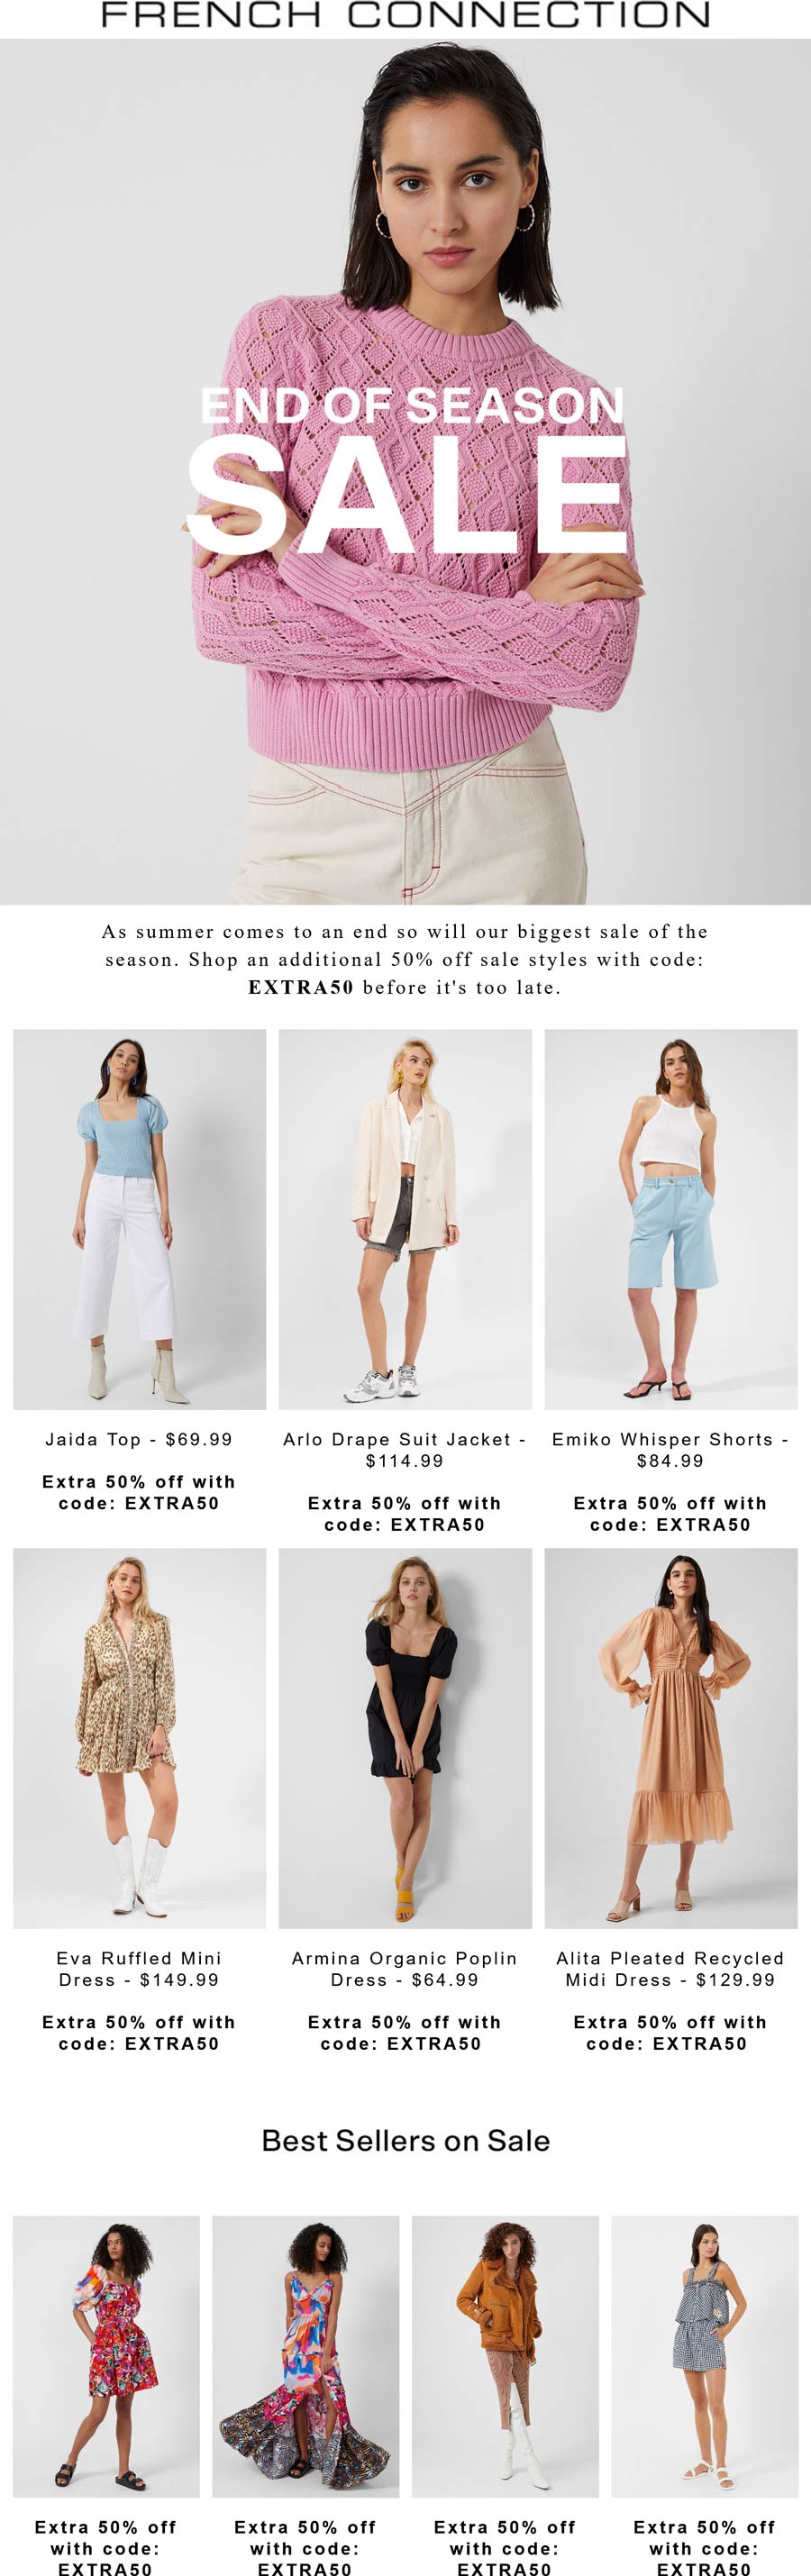 French Connection stores Coupon  Extra 50% off sale styles at French Connection via promo code EXTRA50 #frenchconnection 